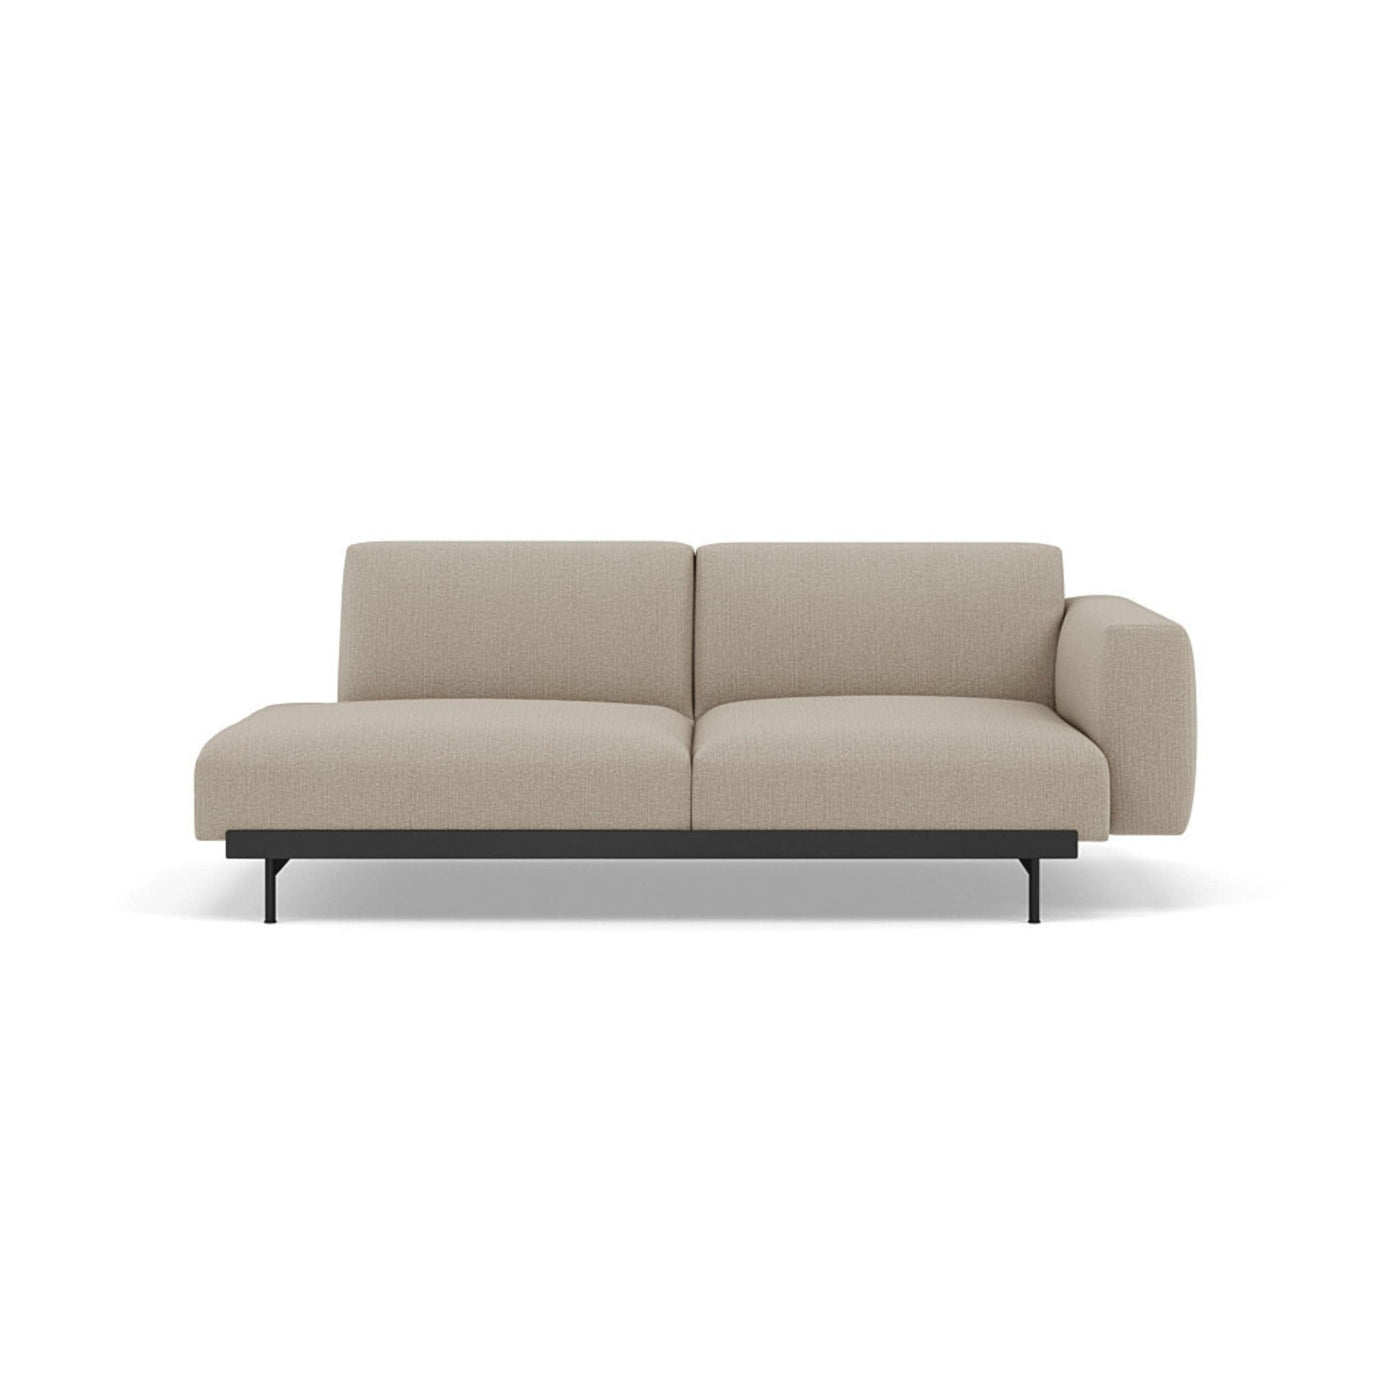 muuto in situ 2 seater sofa configuration 2. Made to order from someday designs. #colour_clay-10